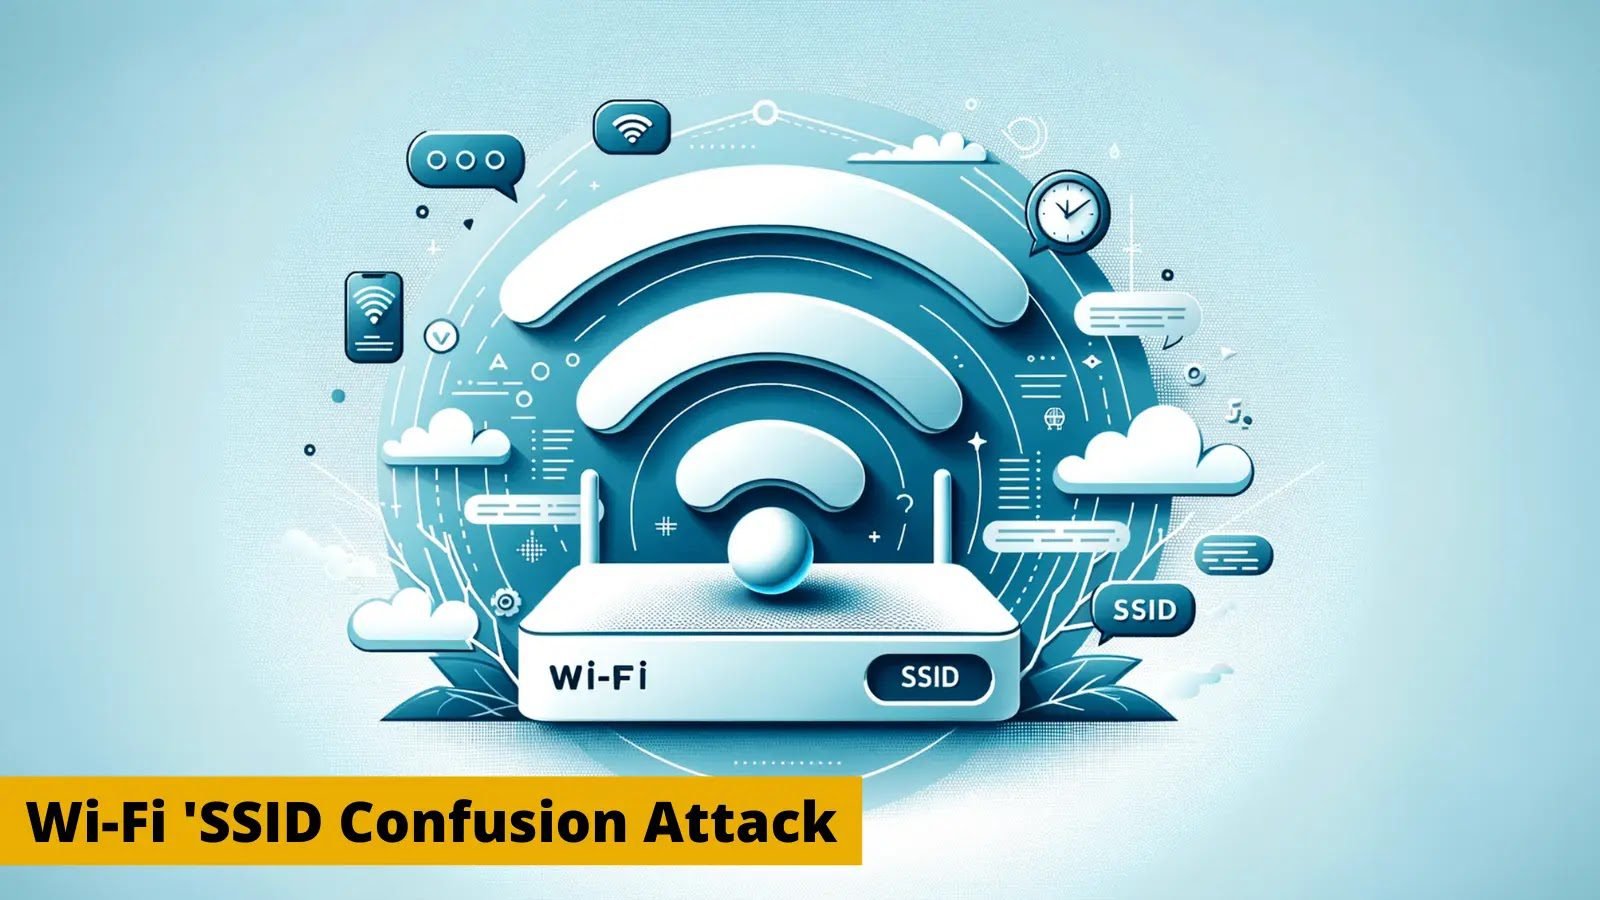 New Wi-Fi ‘SSID Confusion’ Attack Let Attackers Connect To Malicious Network